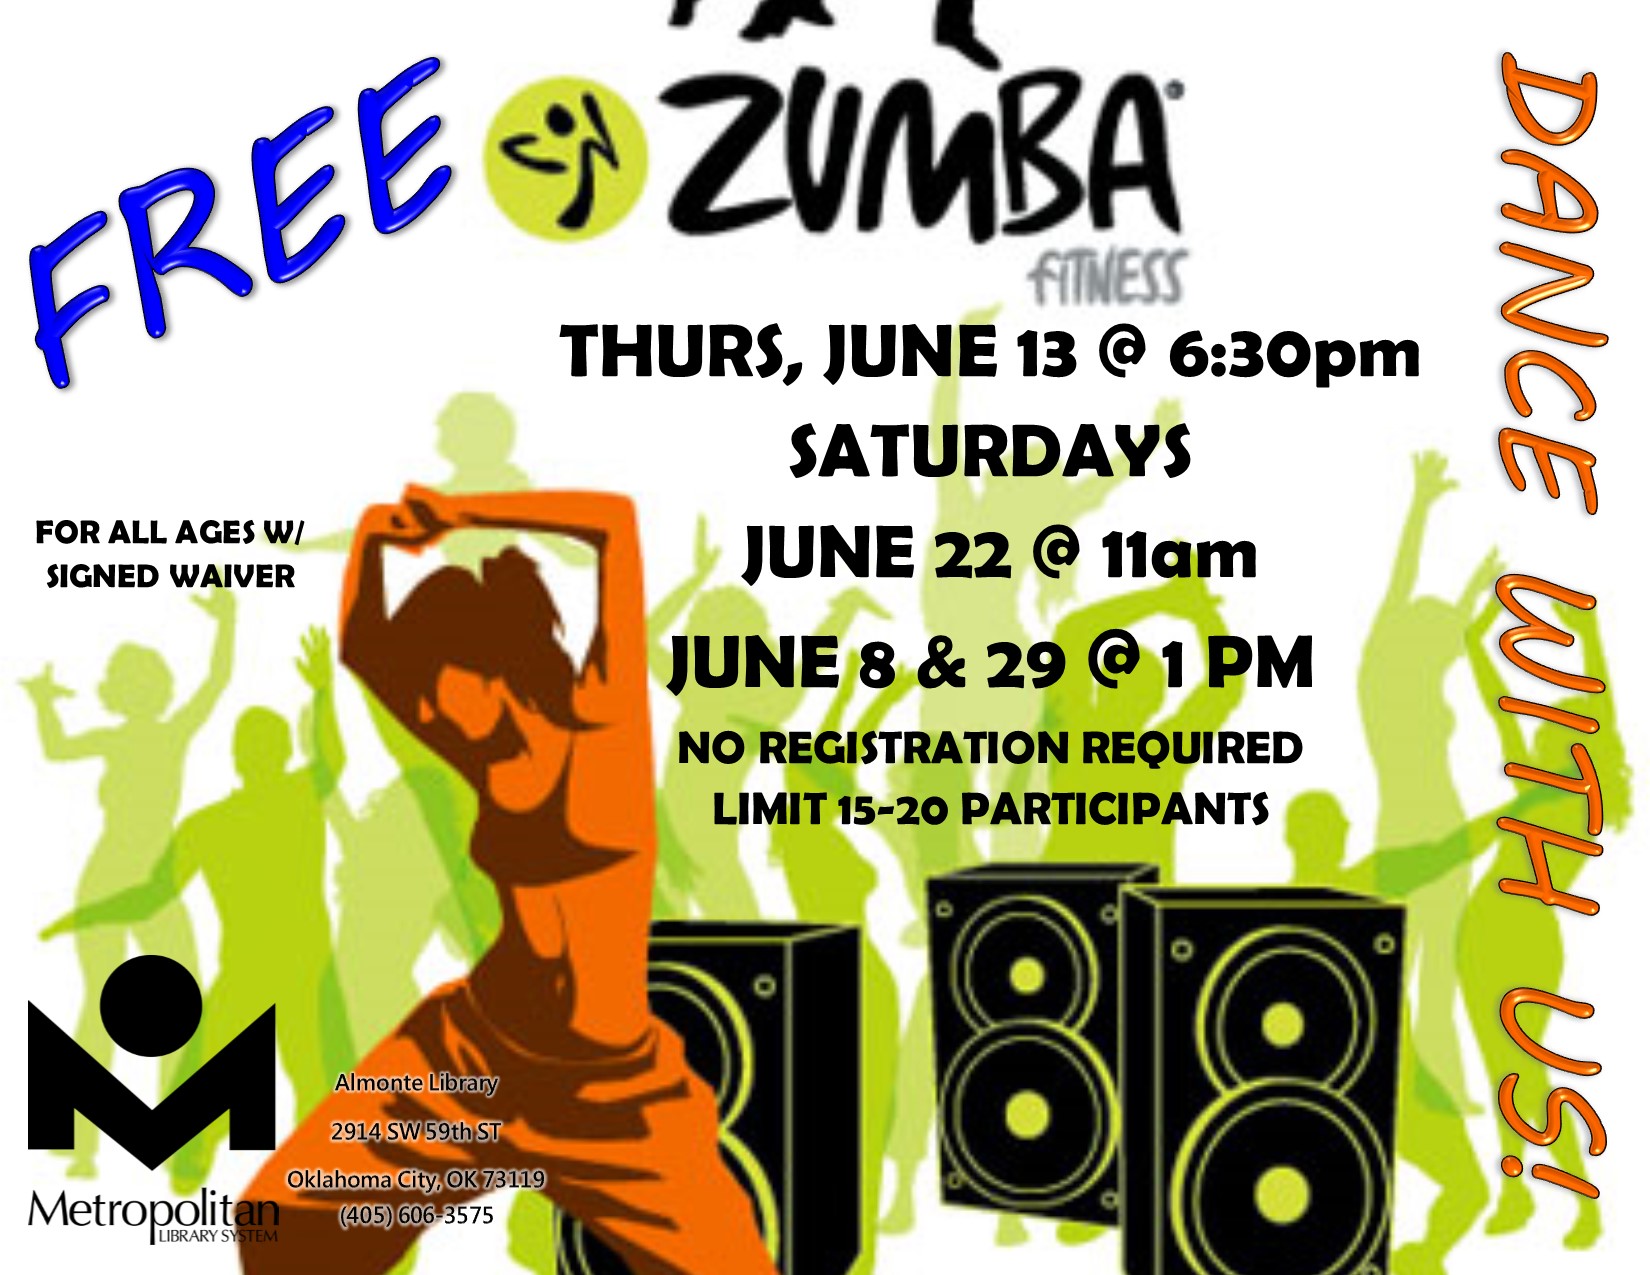 FREE ZUMBA! FOR ALL AGES W/SIGNED WAIVER. LIMIT 15-20